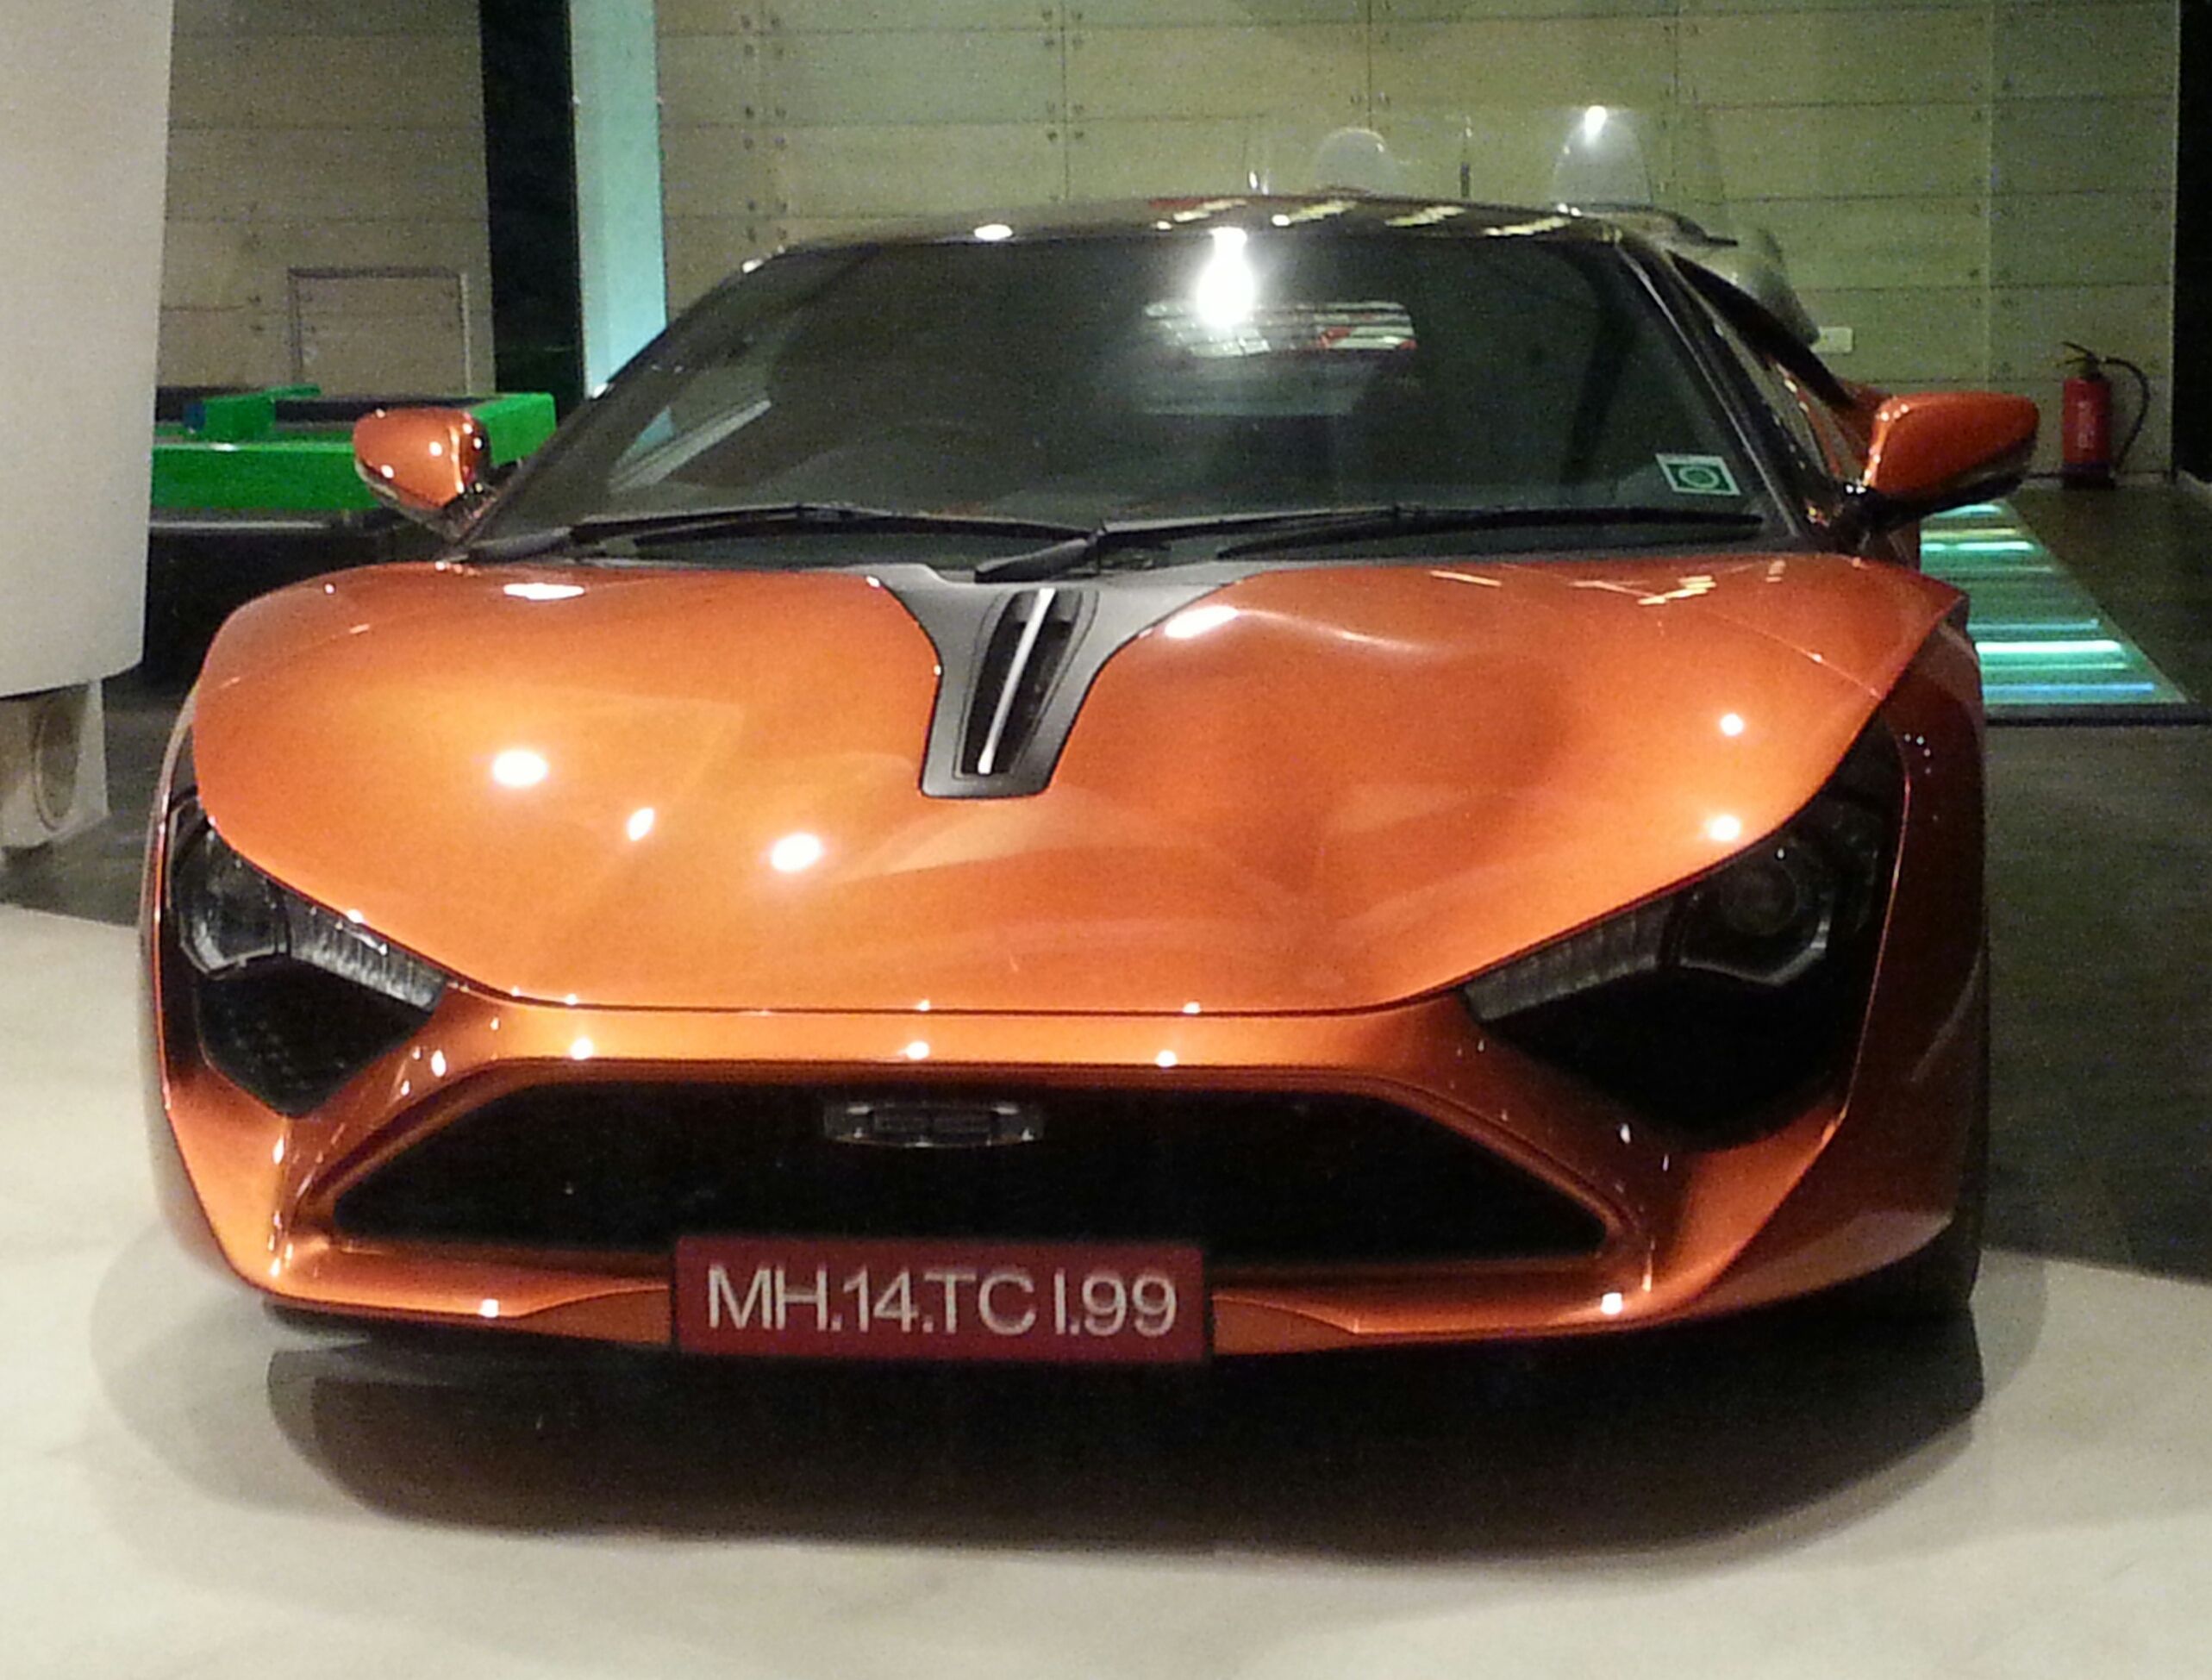 DC Avanti to launch early 2015 | Autocar India